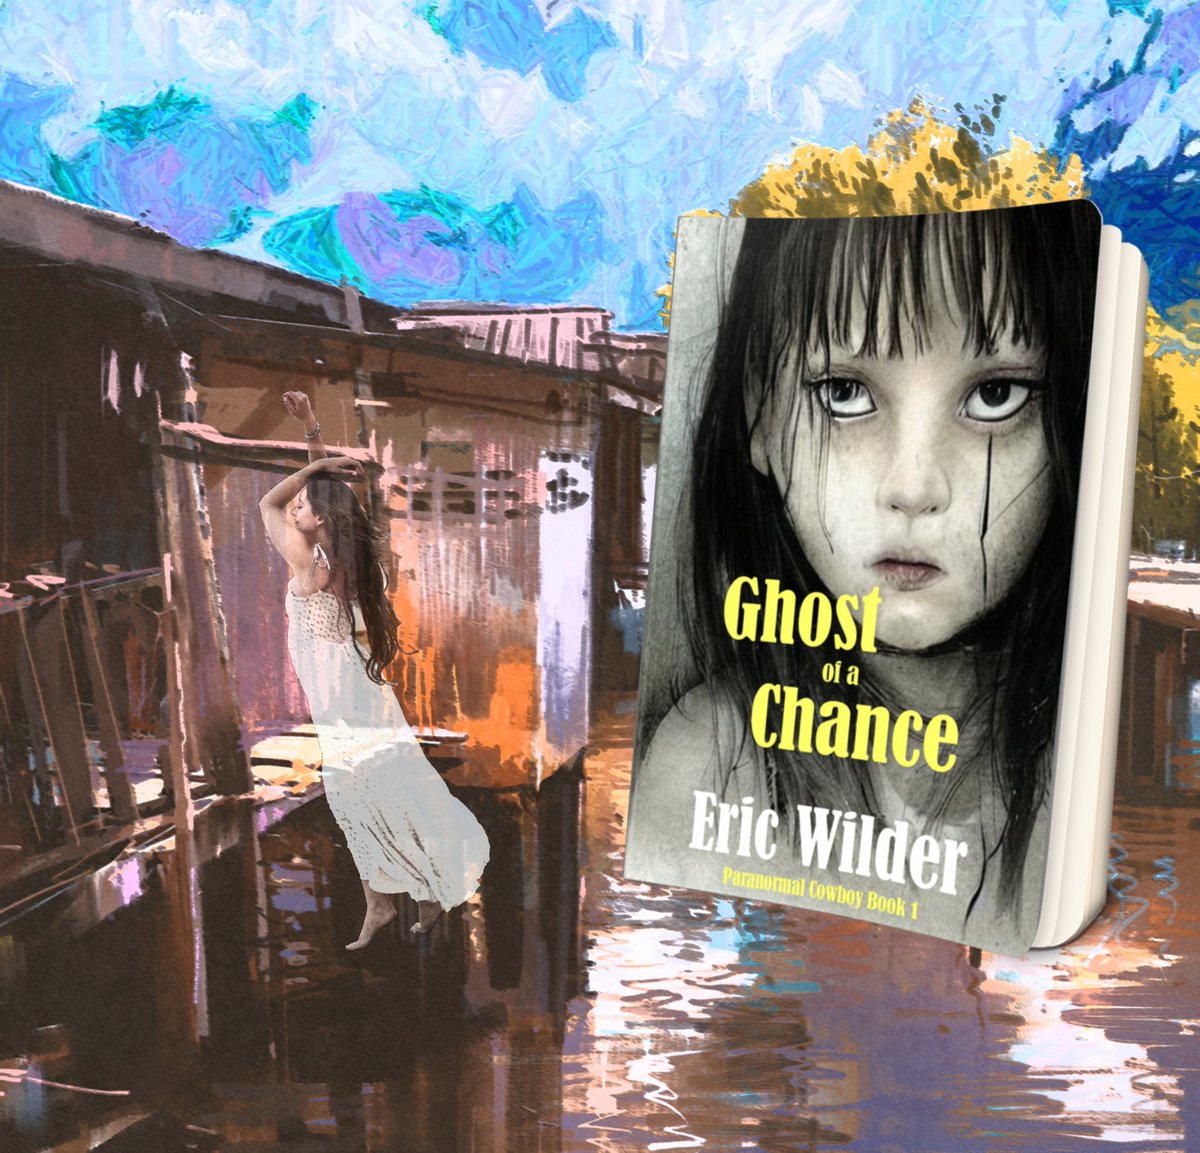 ☠️A rainy night in east Texas leads to murder #BooksWorthReading #mystery #series #ghoststory #EricWilder #KindleUnlimited #Audible #audiobook ERIC WILDER'S BLOGSPOT: Ghost of a Chance - chapters ericwilder.blogspot.com/2018/10/ghost-…